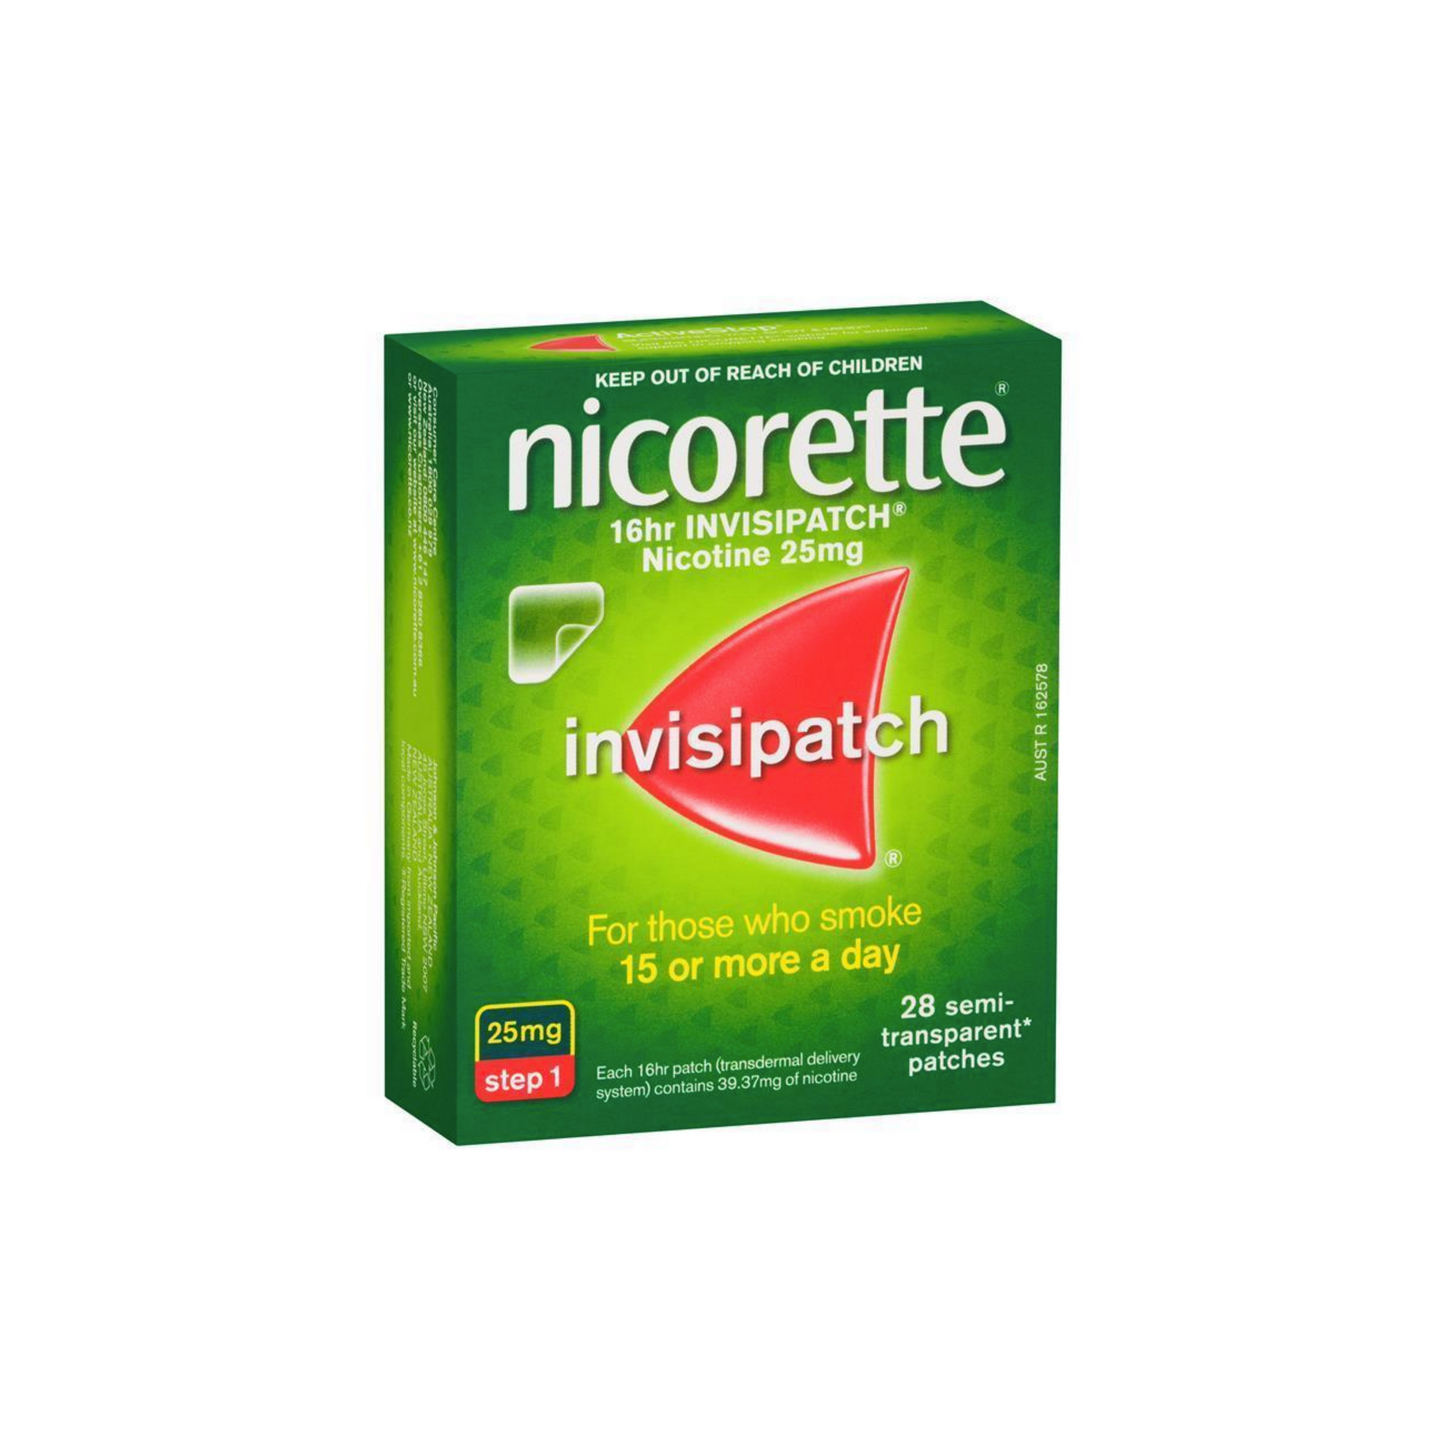 Nicorette Quit Smoking 16hr Invisipatch Step 1 25mg 28 pack